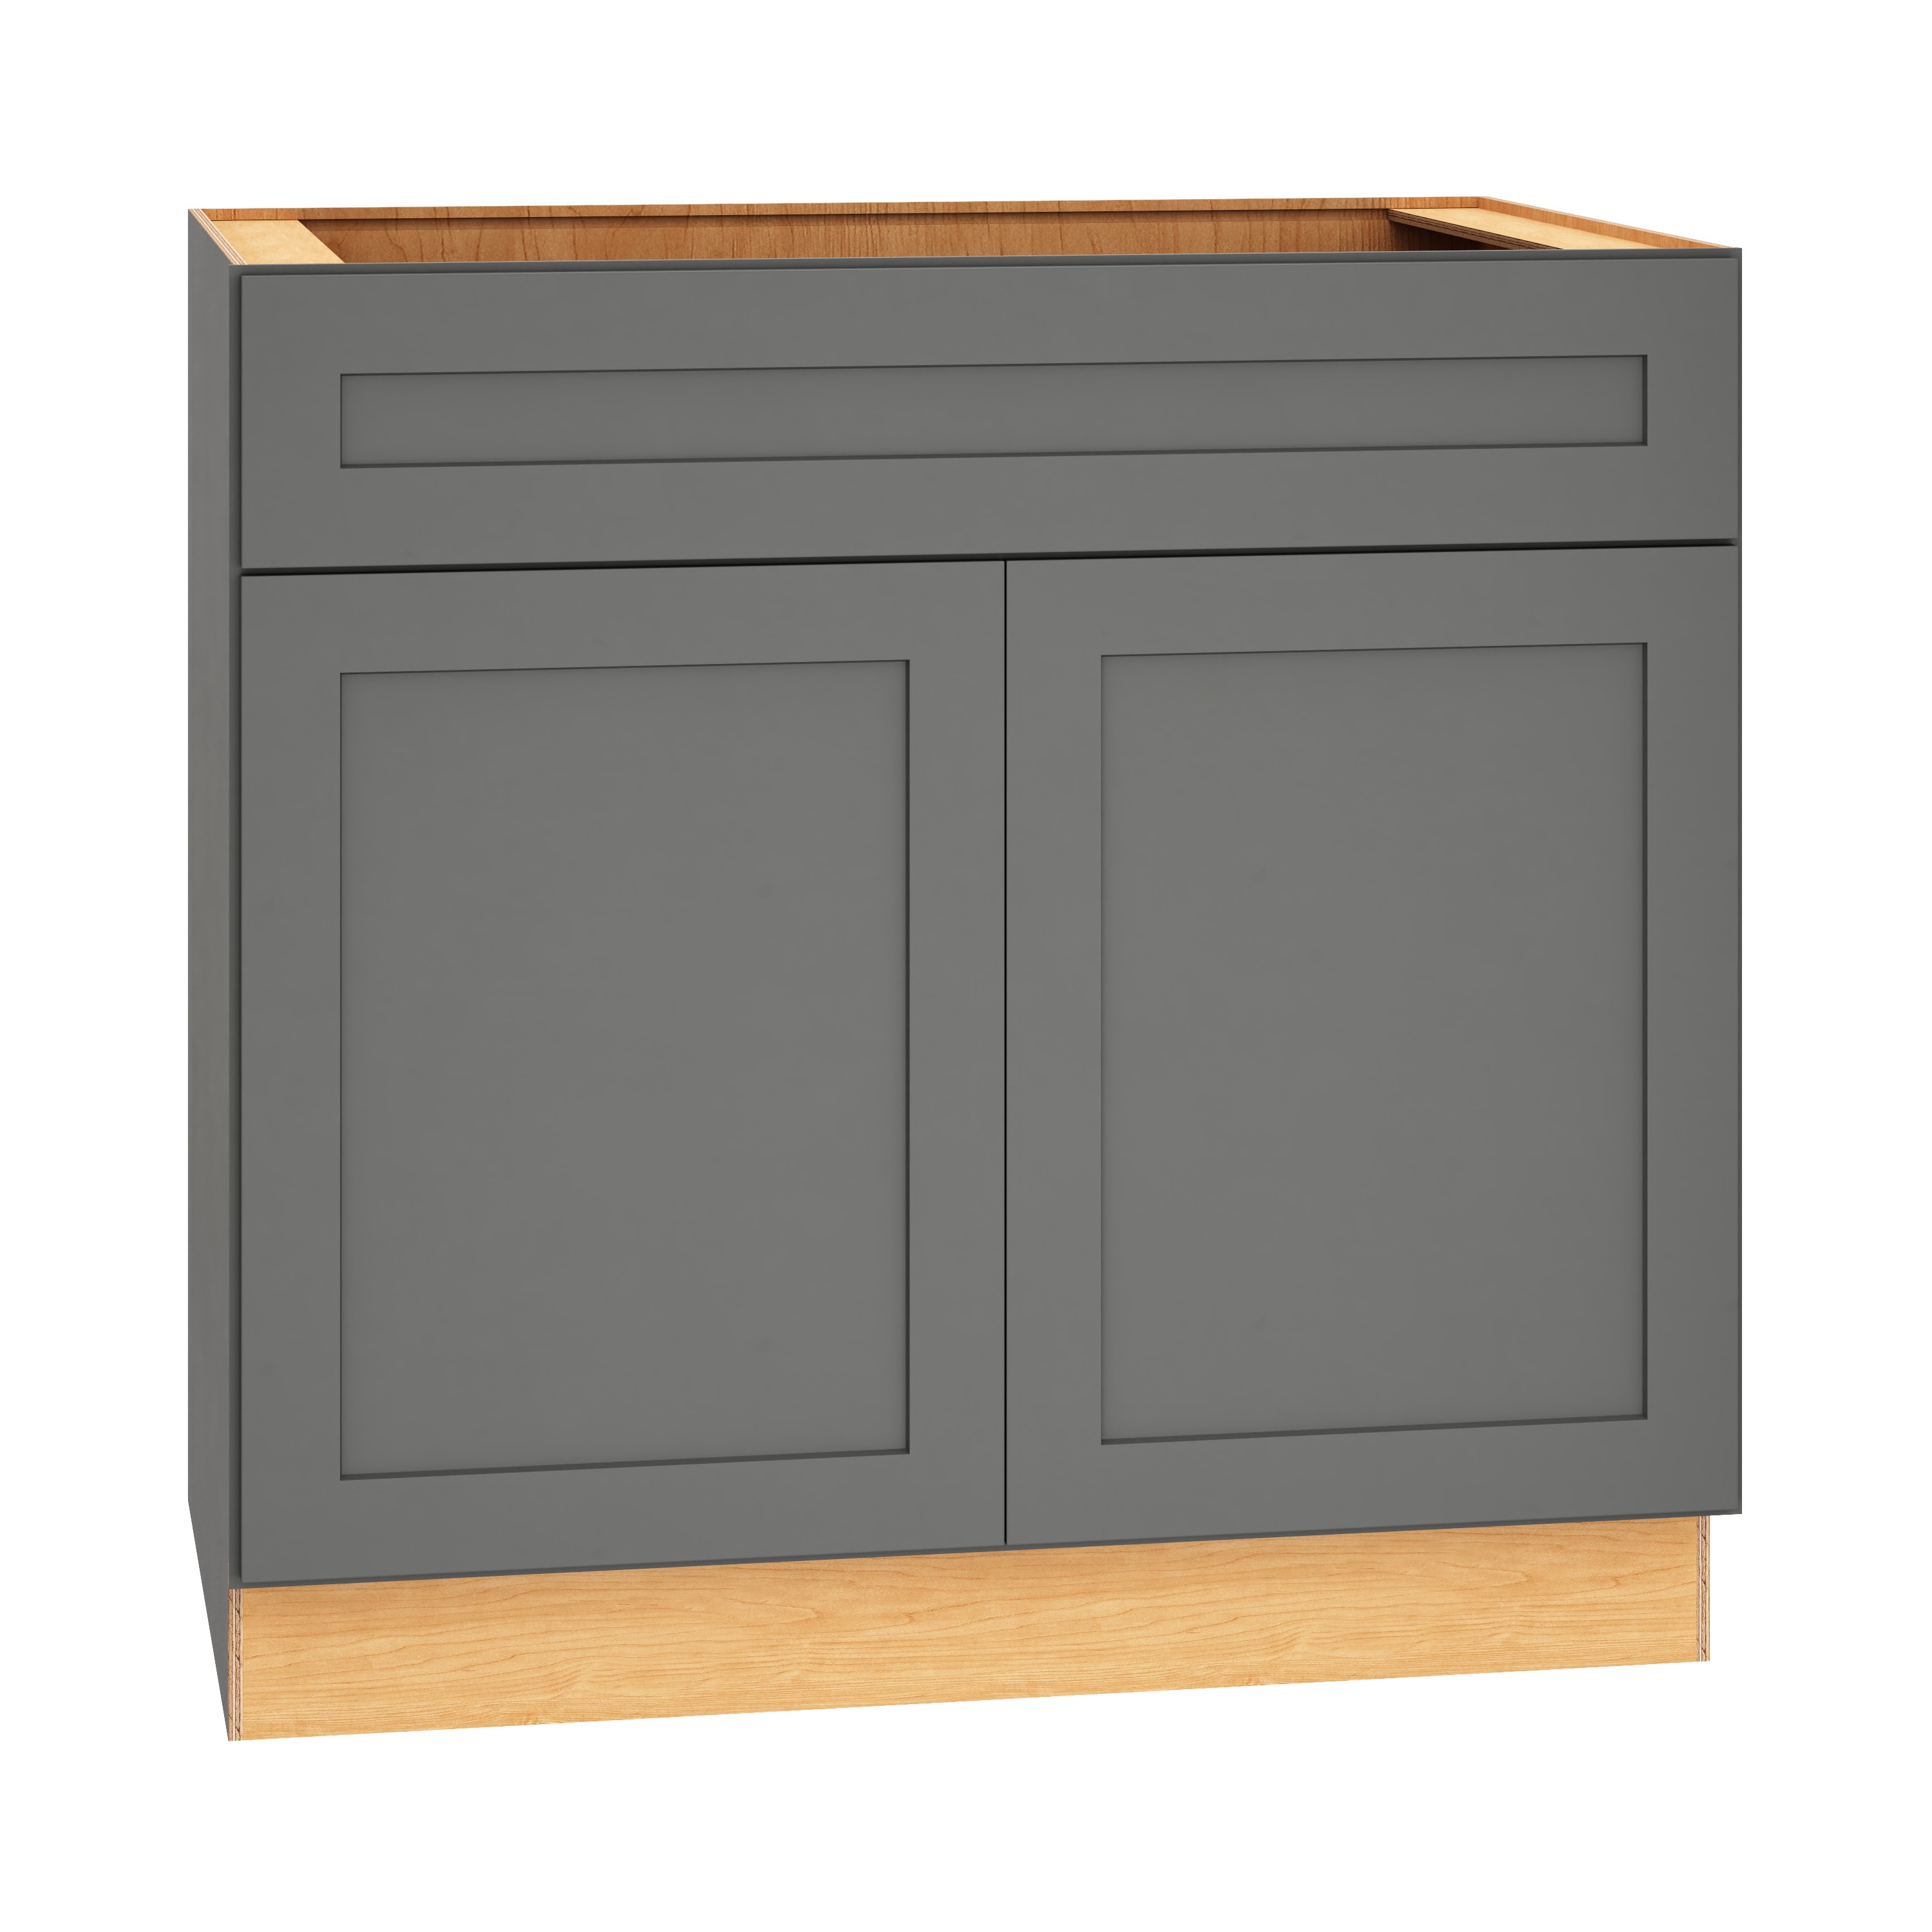 Base Kitchen Cabinets at Lowes.com